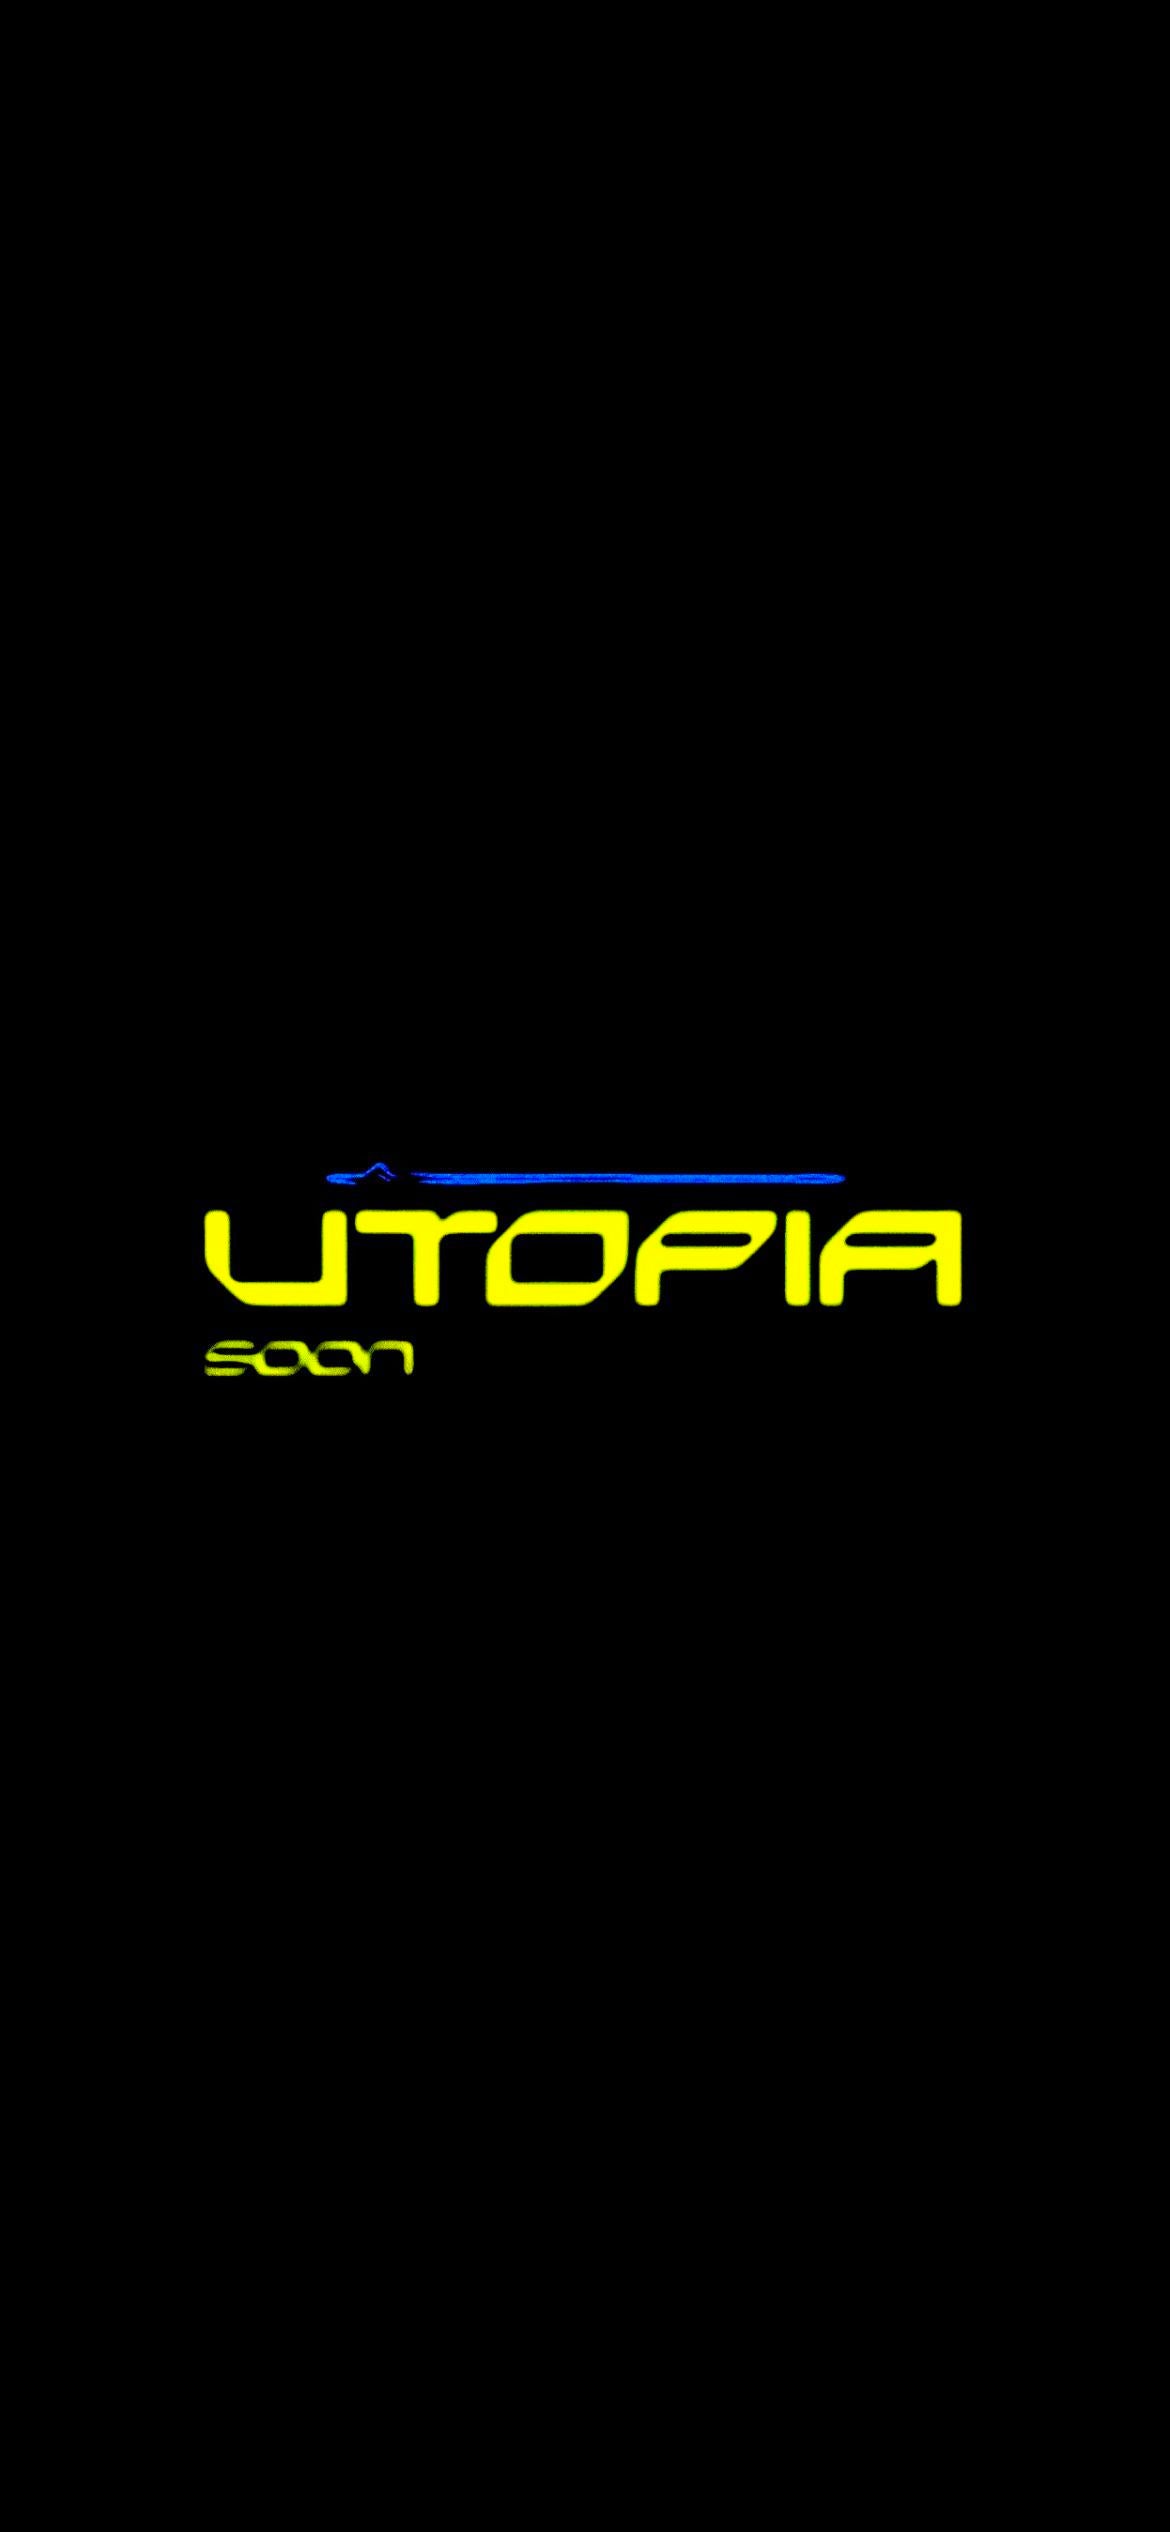 UTOPIA iPhone 12 wallpaper for yall, r